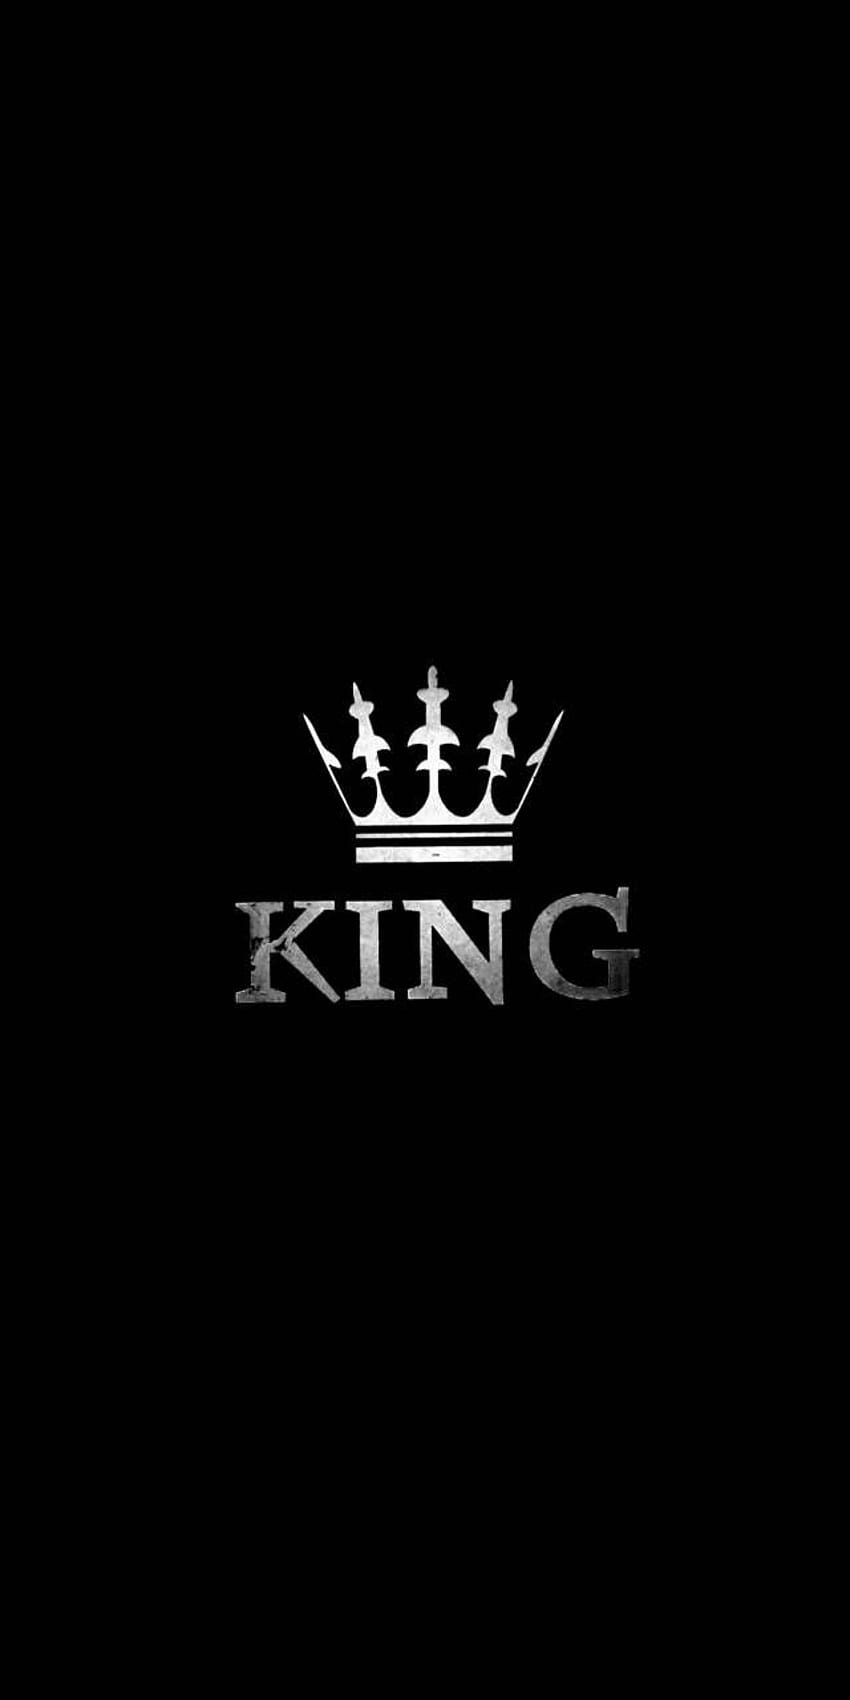 King by NDeath_OZ - 91 now. Browse million. Lock screen android, Phone lock screen , Phone screen, Black King Crown HD phone wallpaper